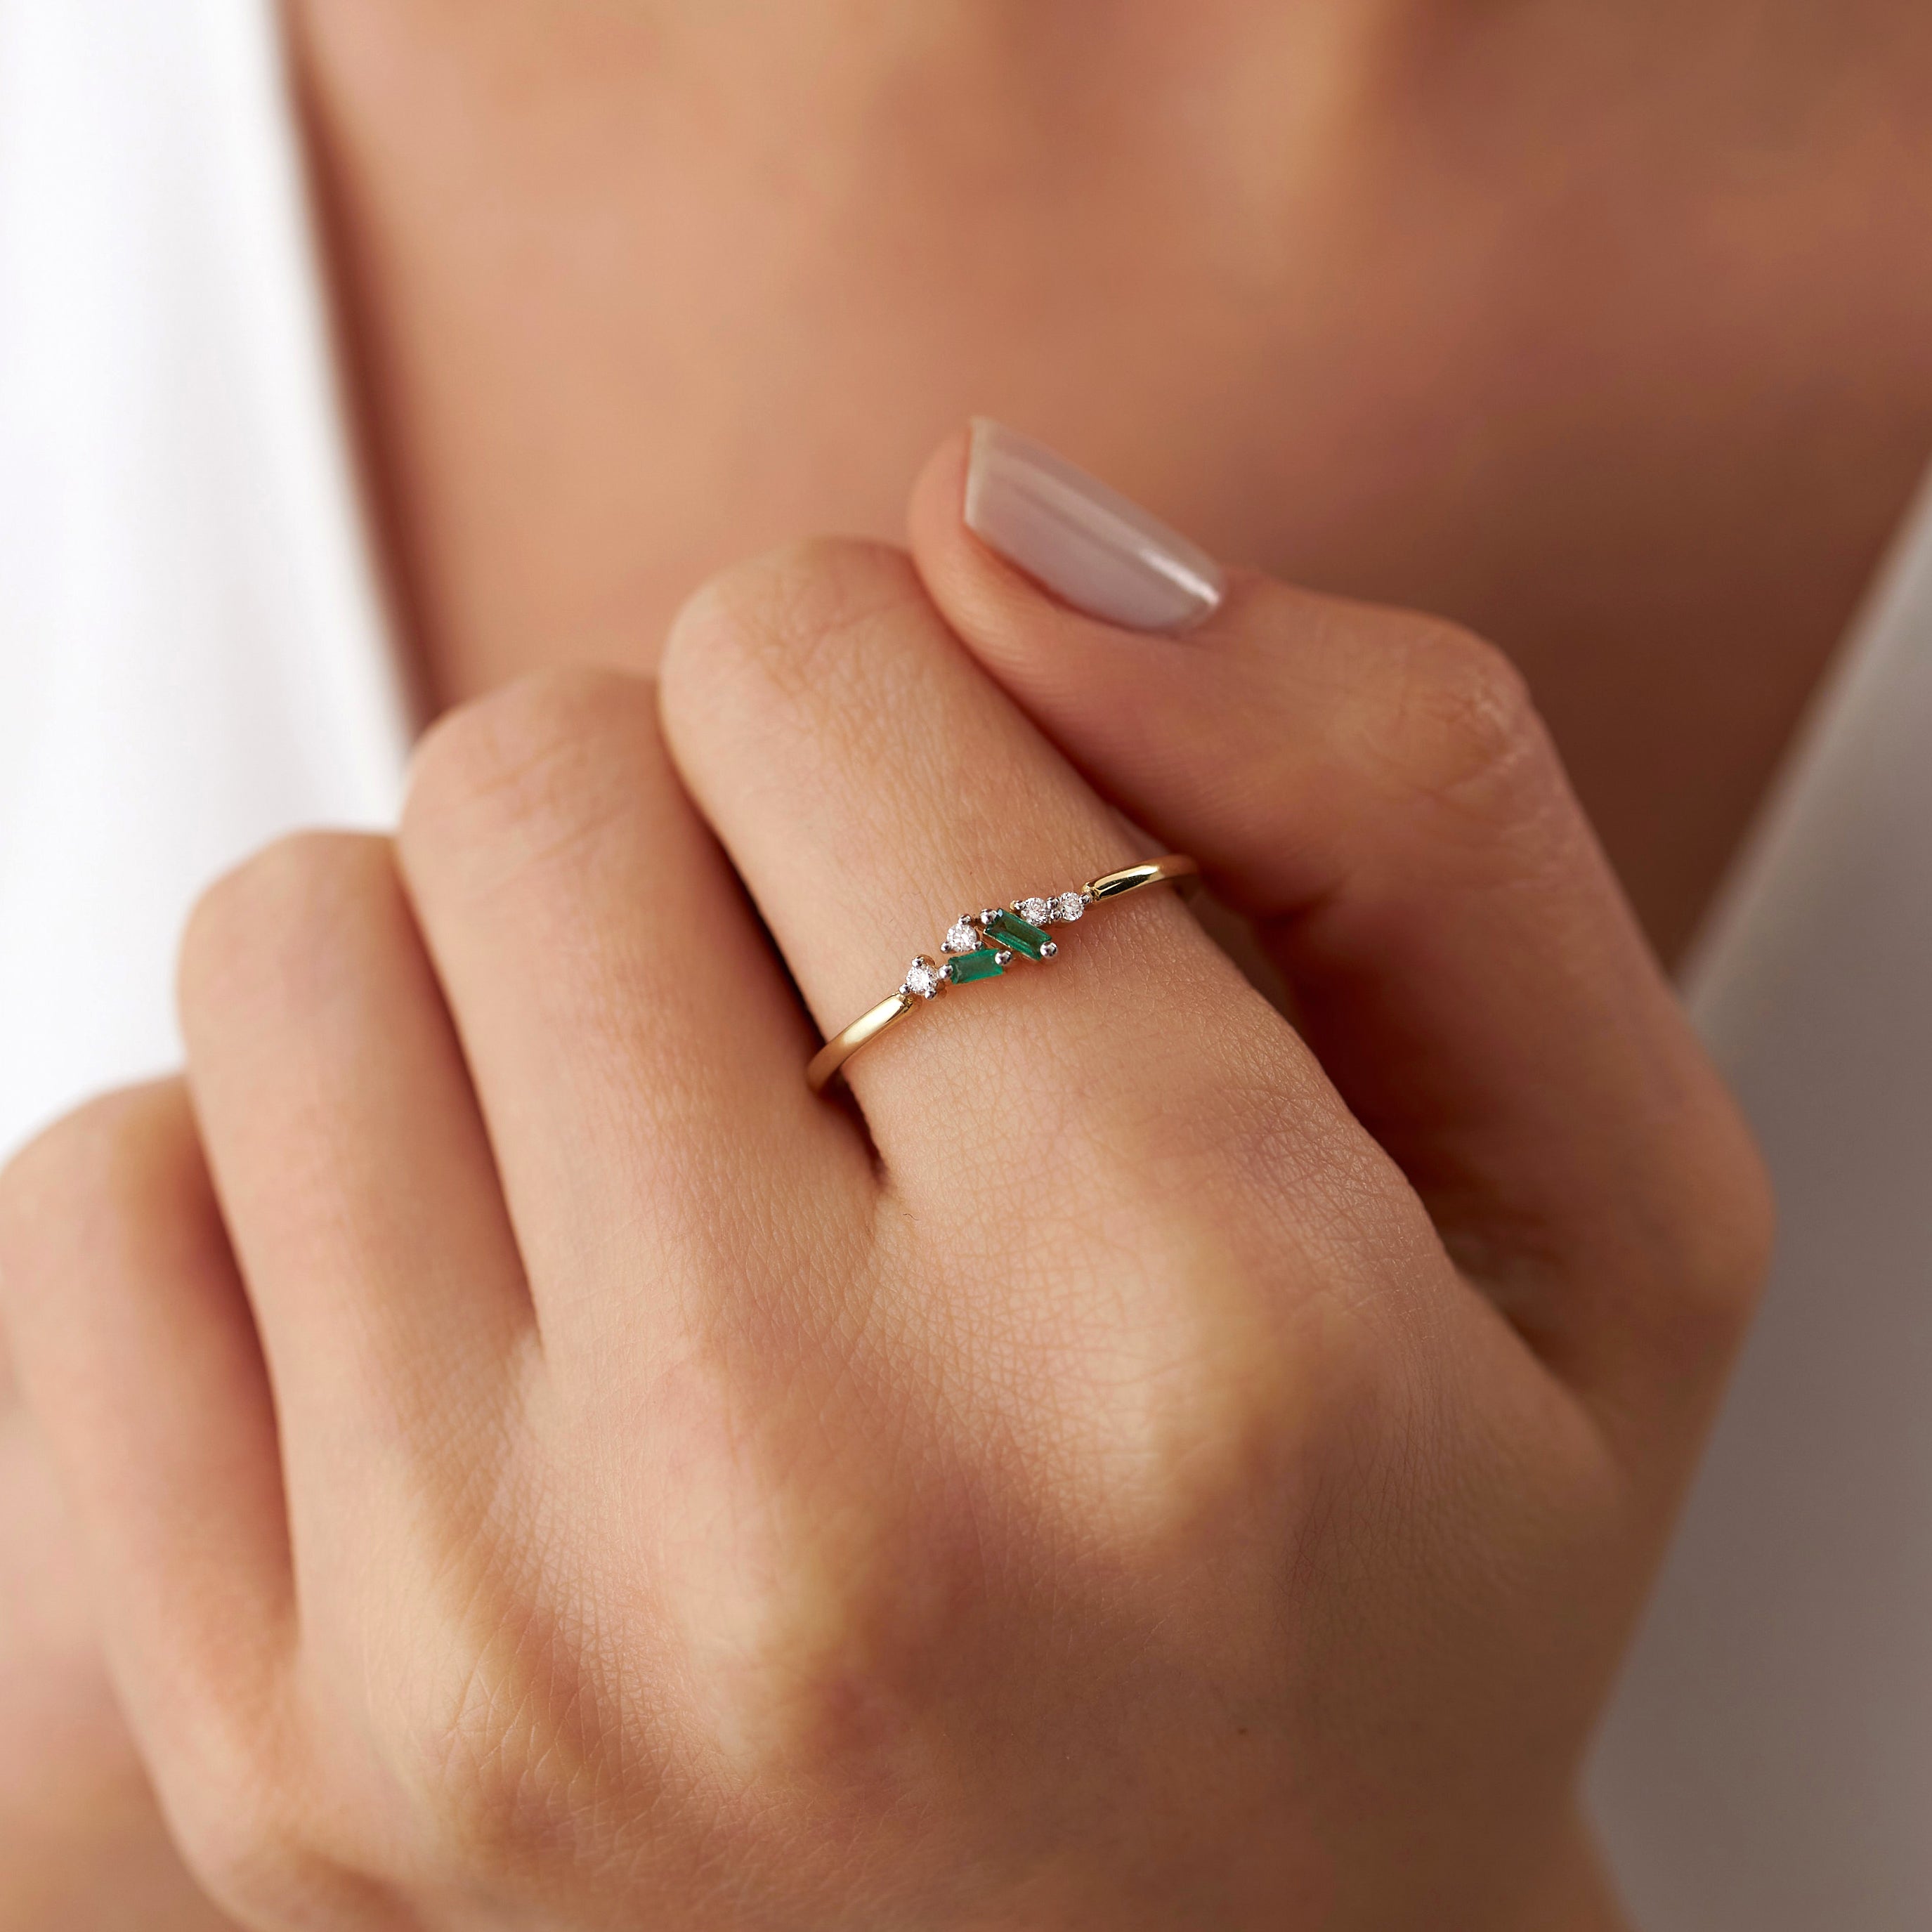 Dainty Diamond and Emerald Ring in 14K Gold